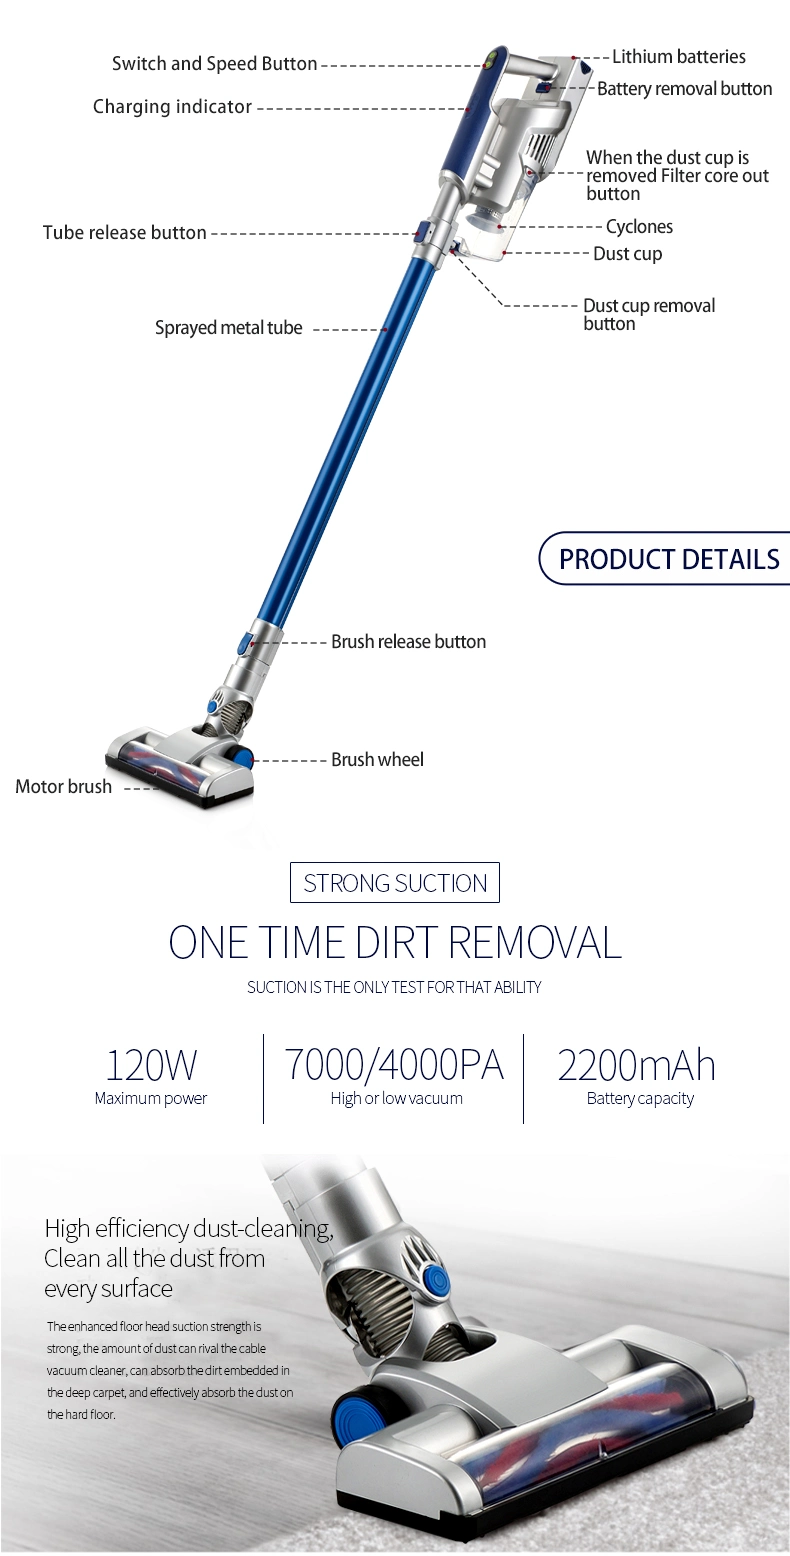 House Clean Cordless Vacuum Cleaner Wireless Home Vacuum Cleaner